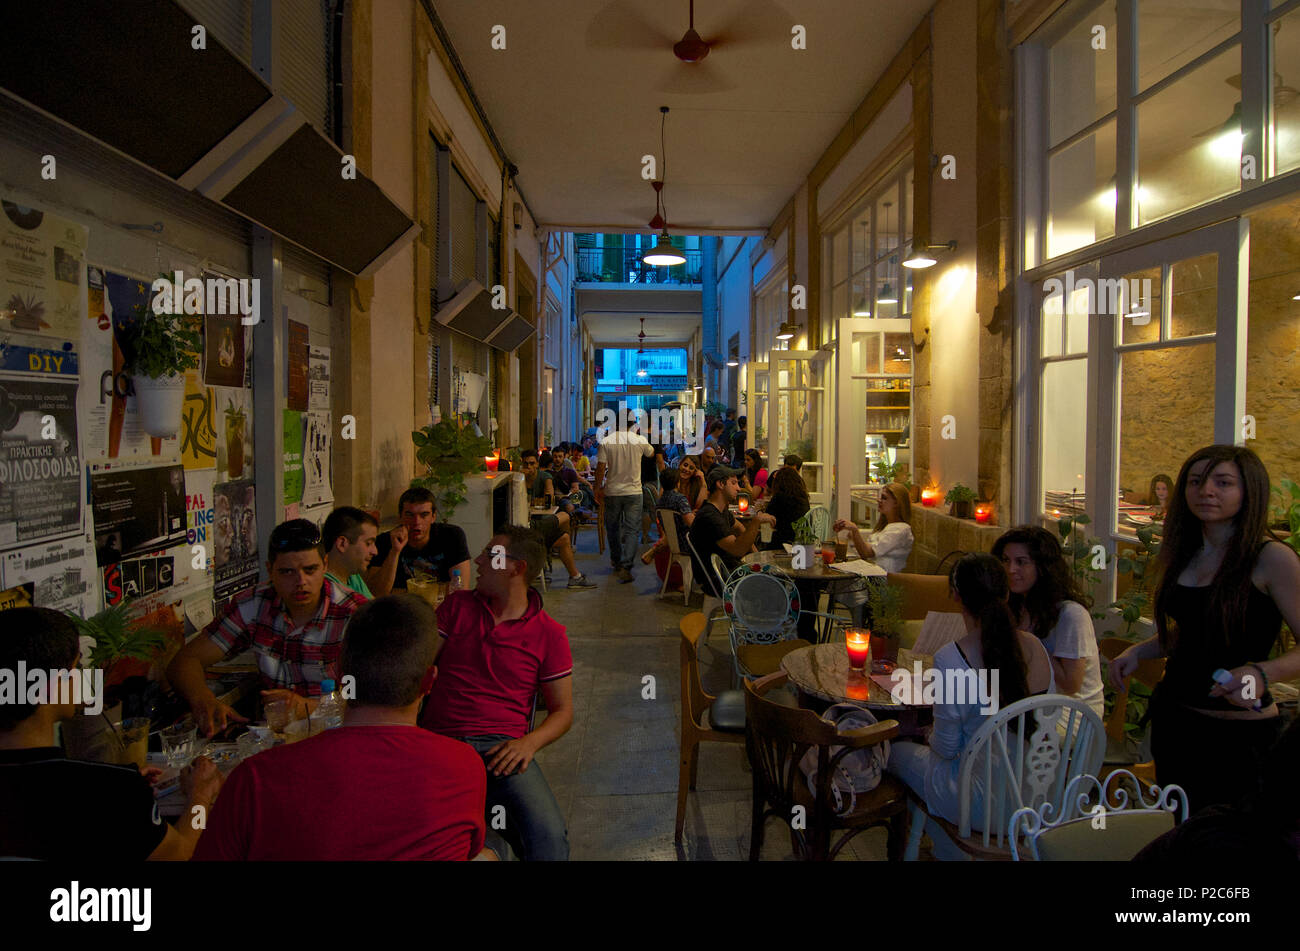 Many people in the evening in Cafe Pieto in a Passage in Leika Gaitonia in Lefkosia, Nicosia, Cyprus Stock Photo